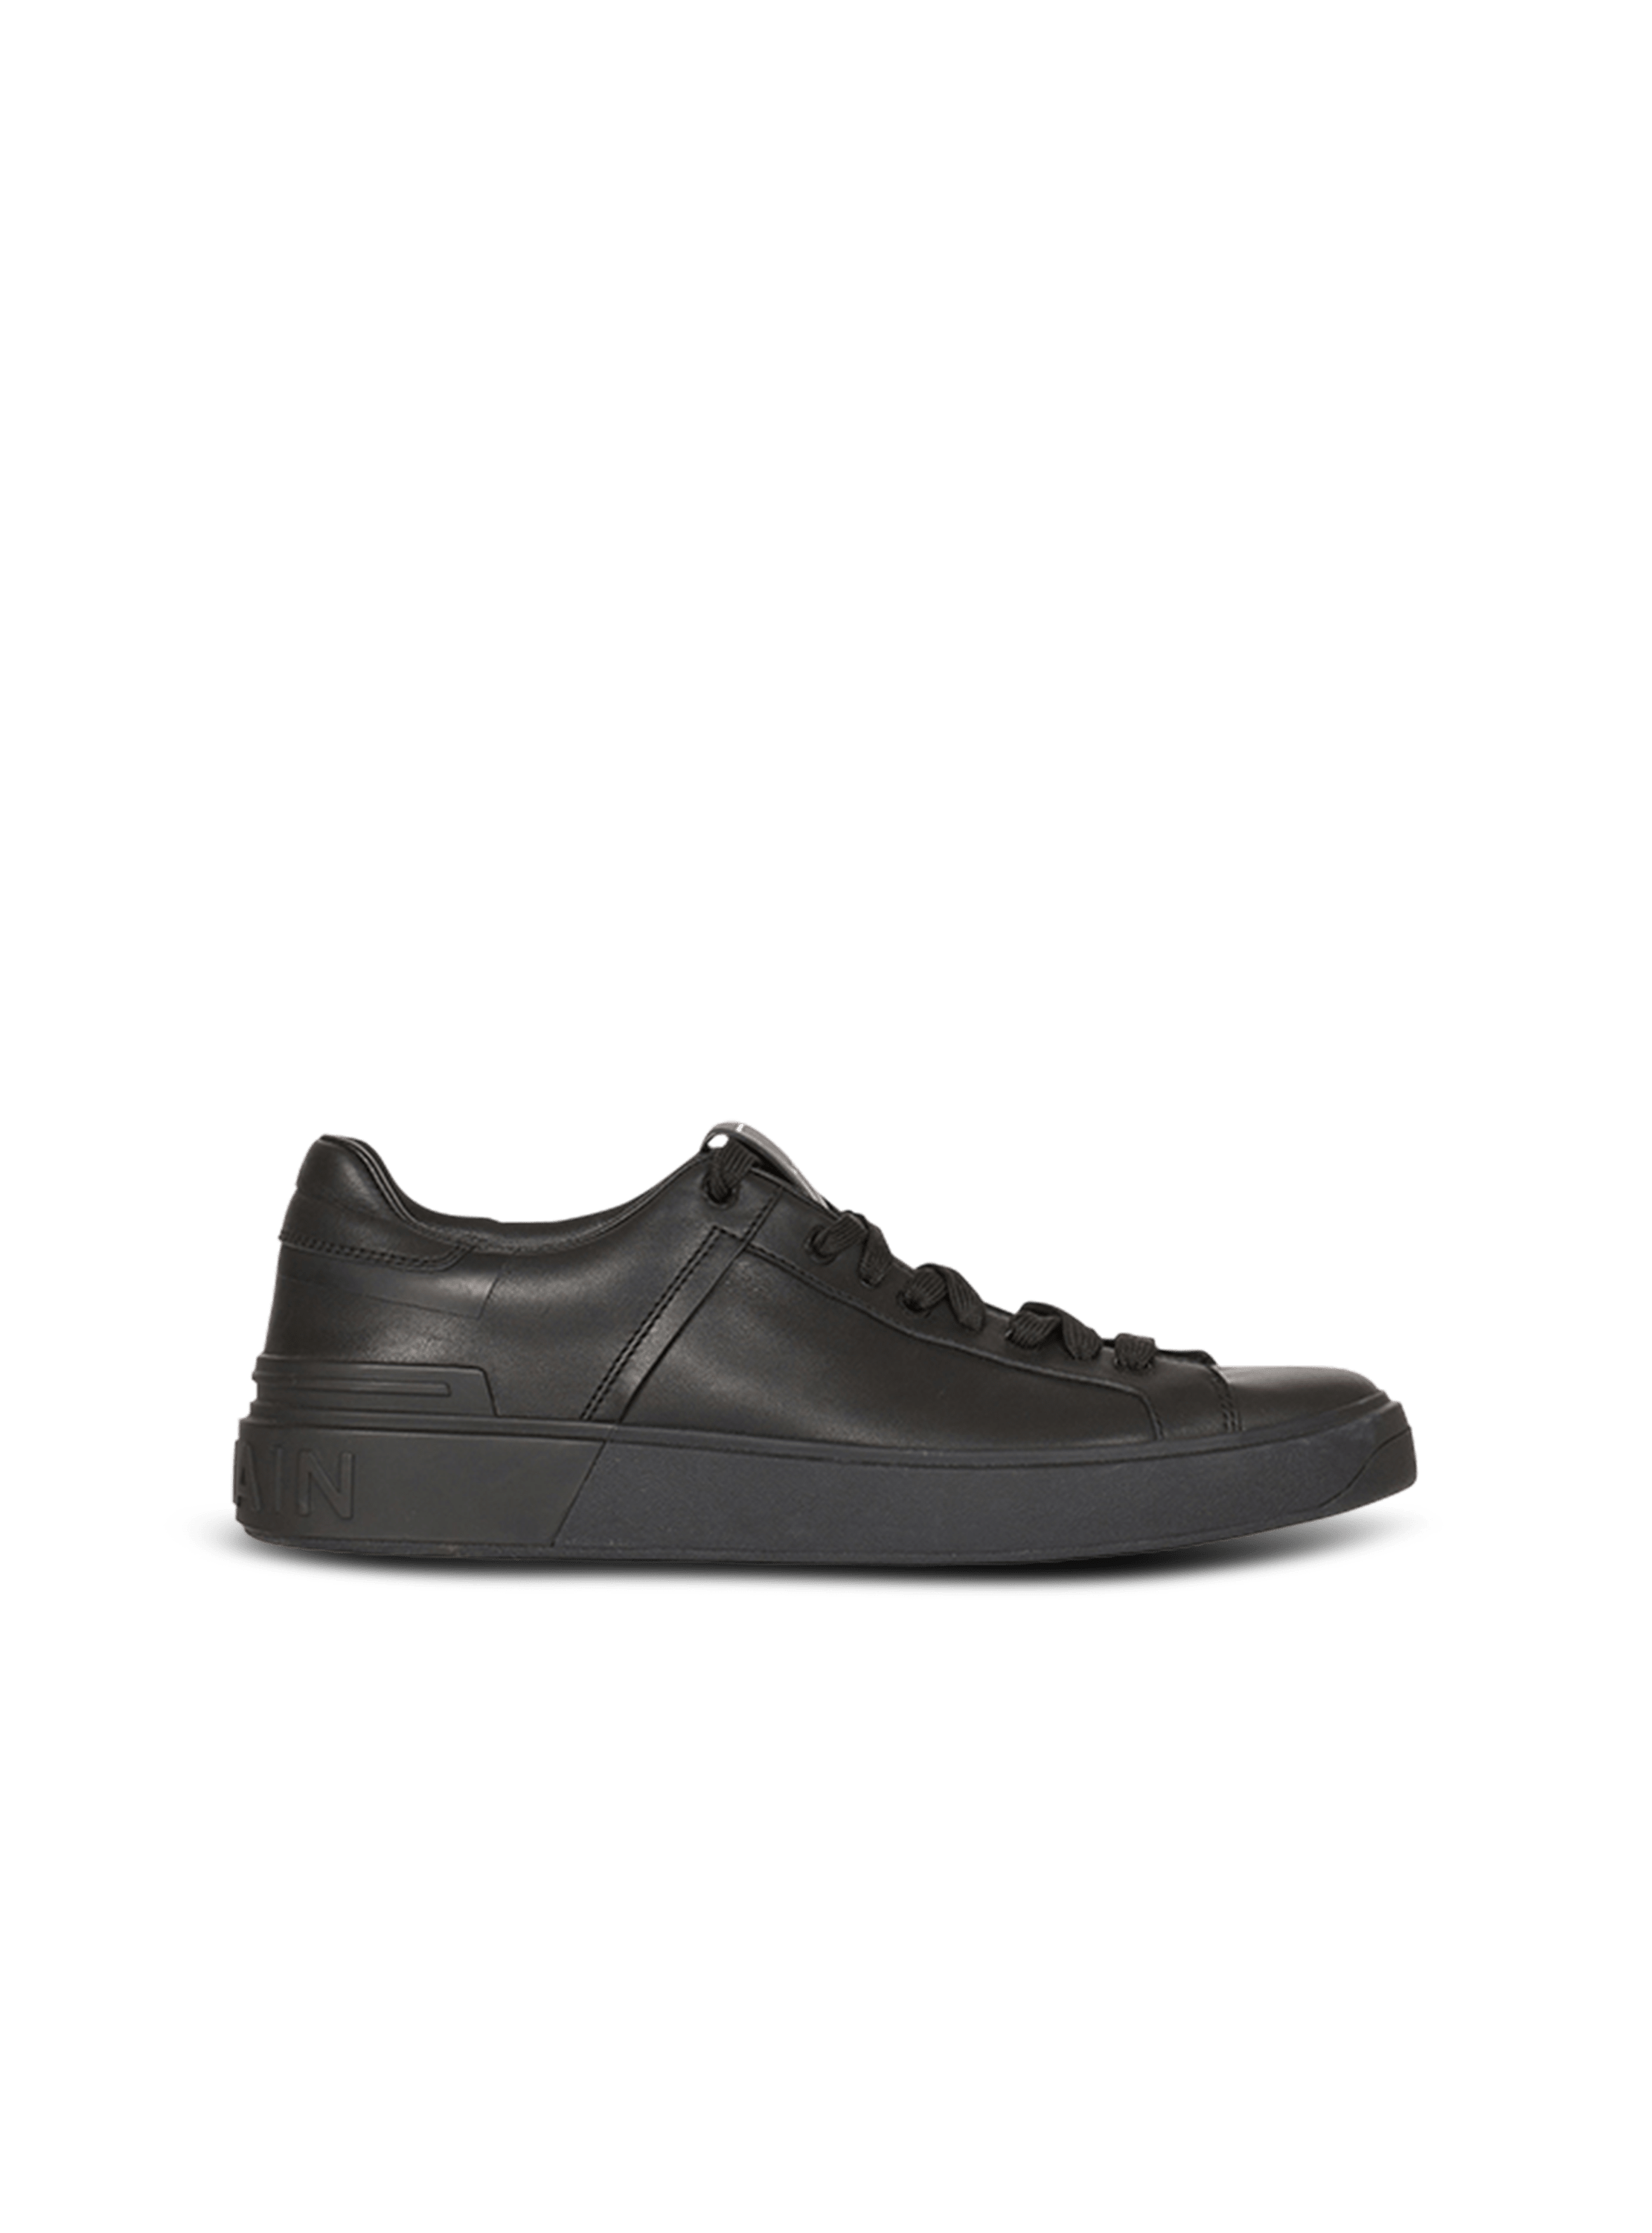 B-Court leather trainers, black, hi-res